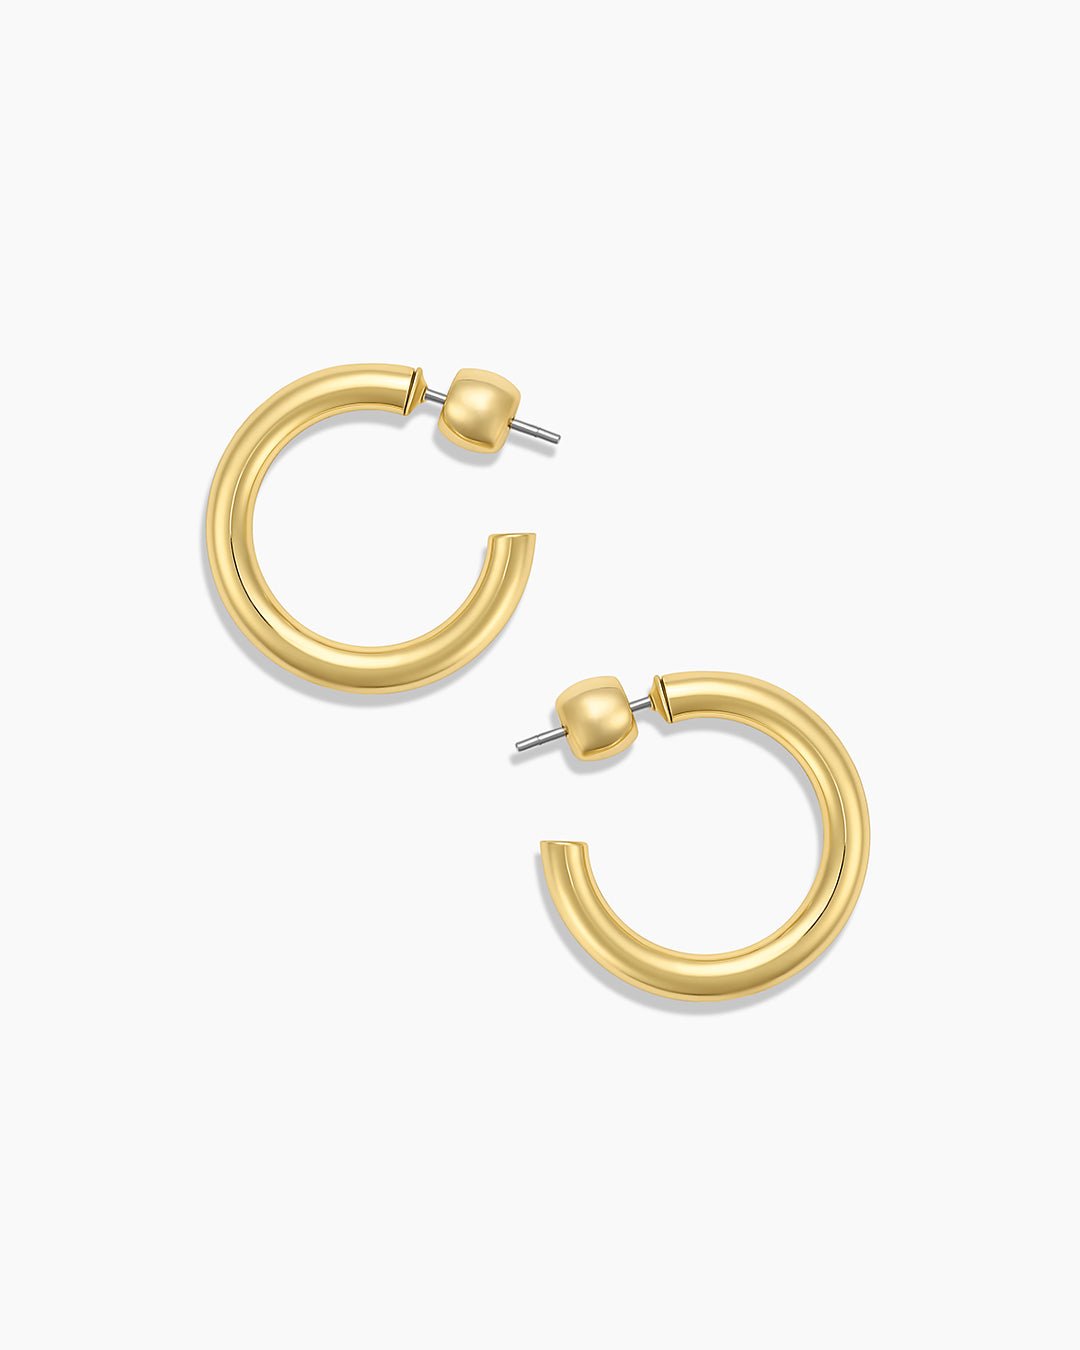 Carter Small Hoops || option::Gold Plated